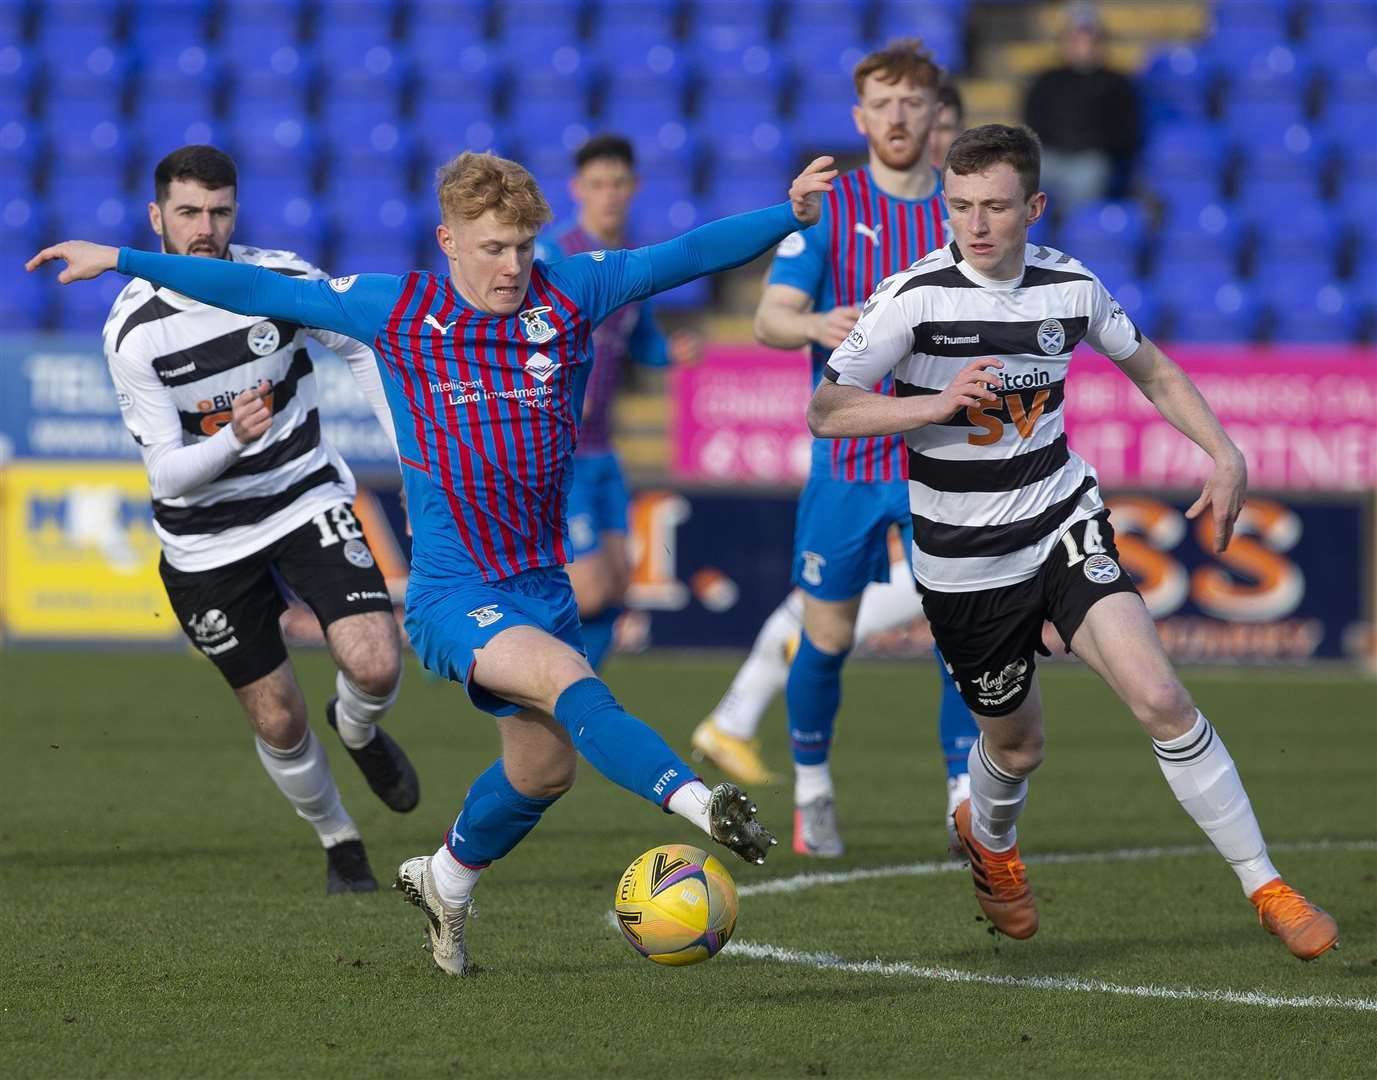 Sam Pearson in action for Inverness Caledonian Thistle.